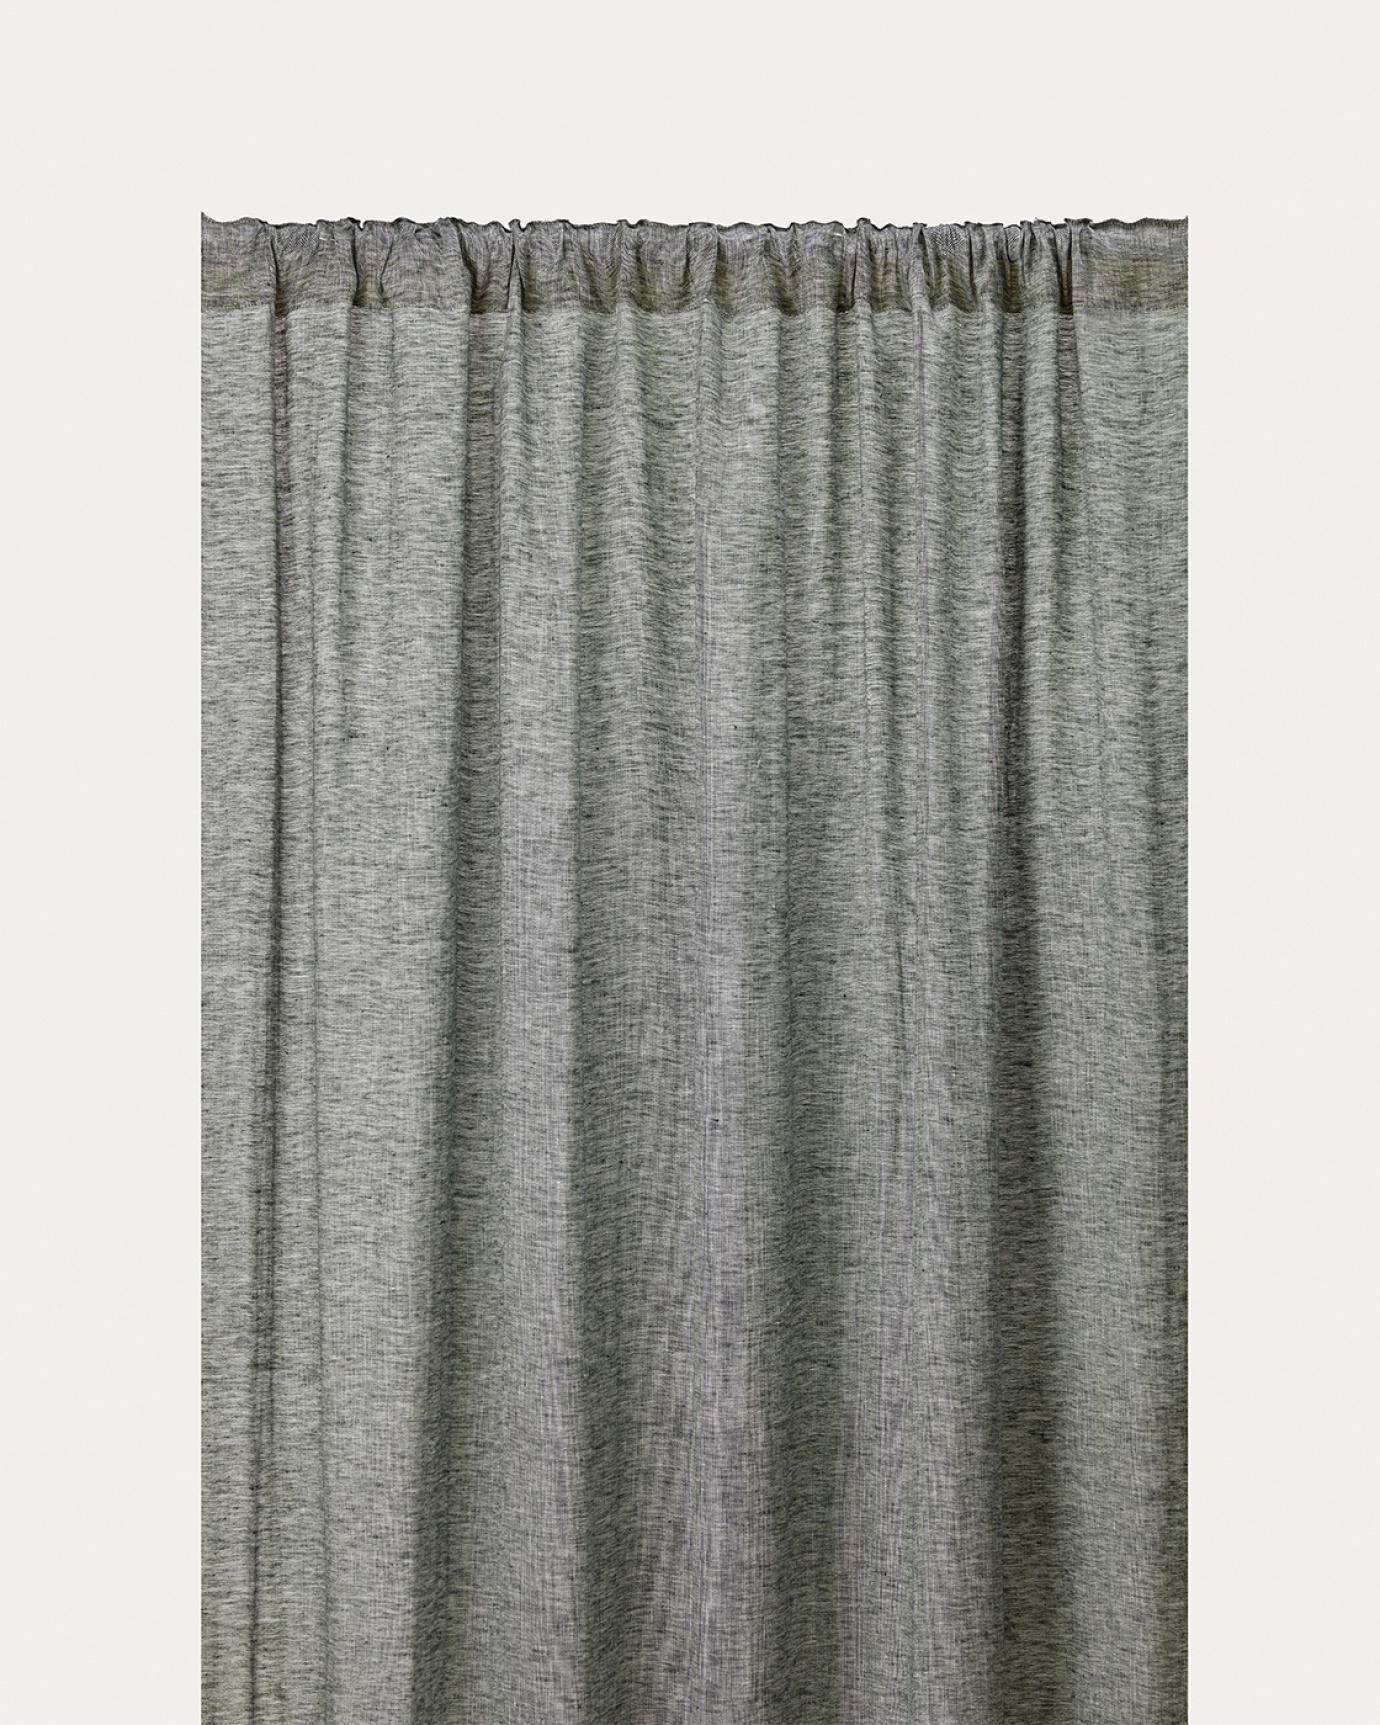 Product image deep emerald green INTERMEZZO curtain of sheer linen with finished pleat tape from LINUM DESIGN. Size 140x290 cm and sold in 2-pack.